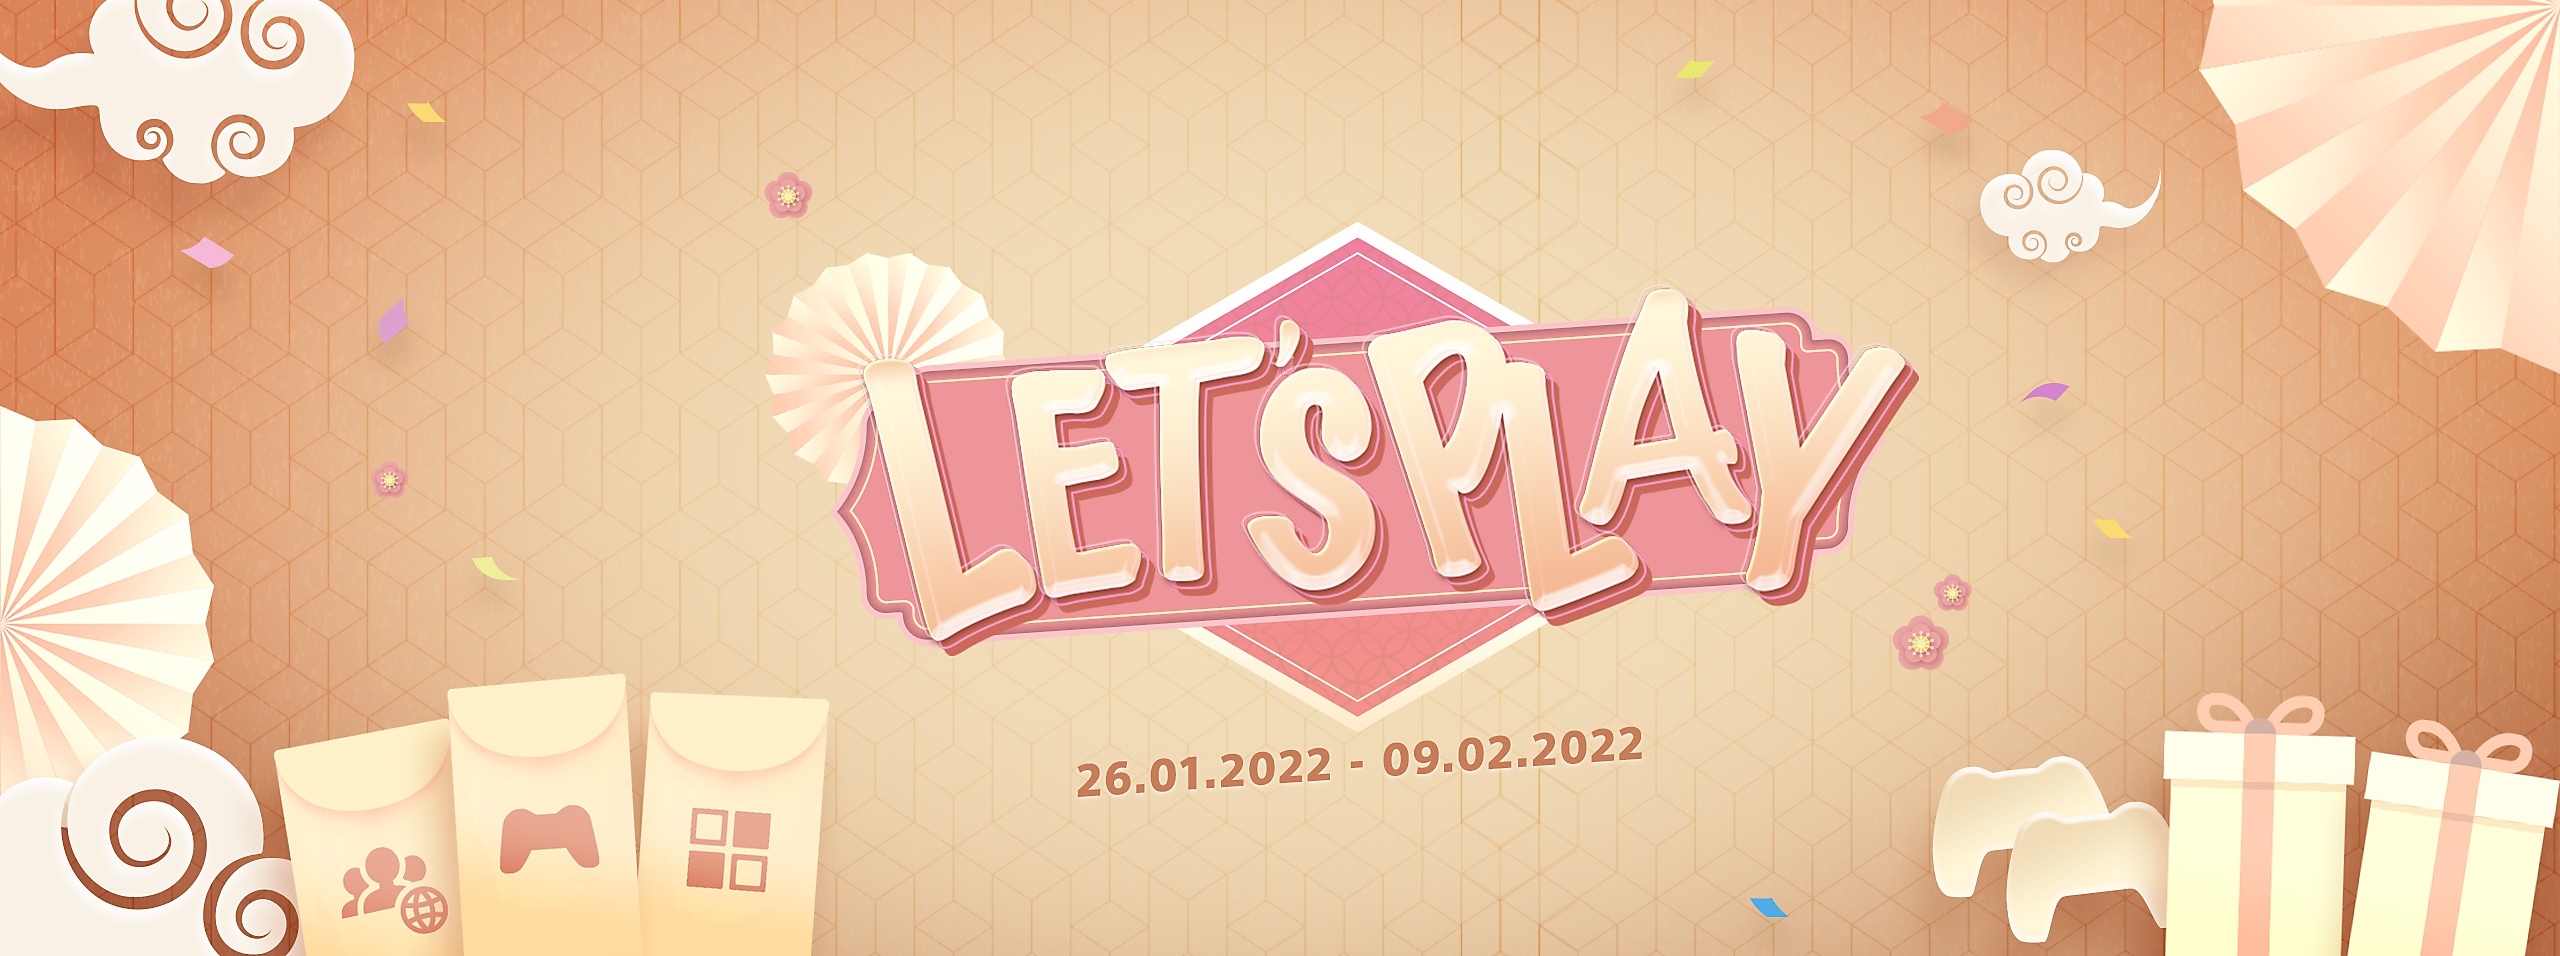 Let's Play logo